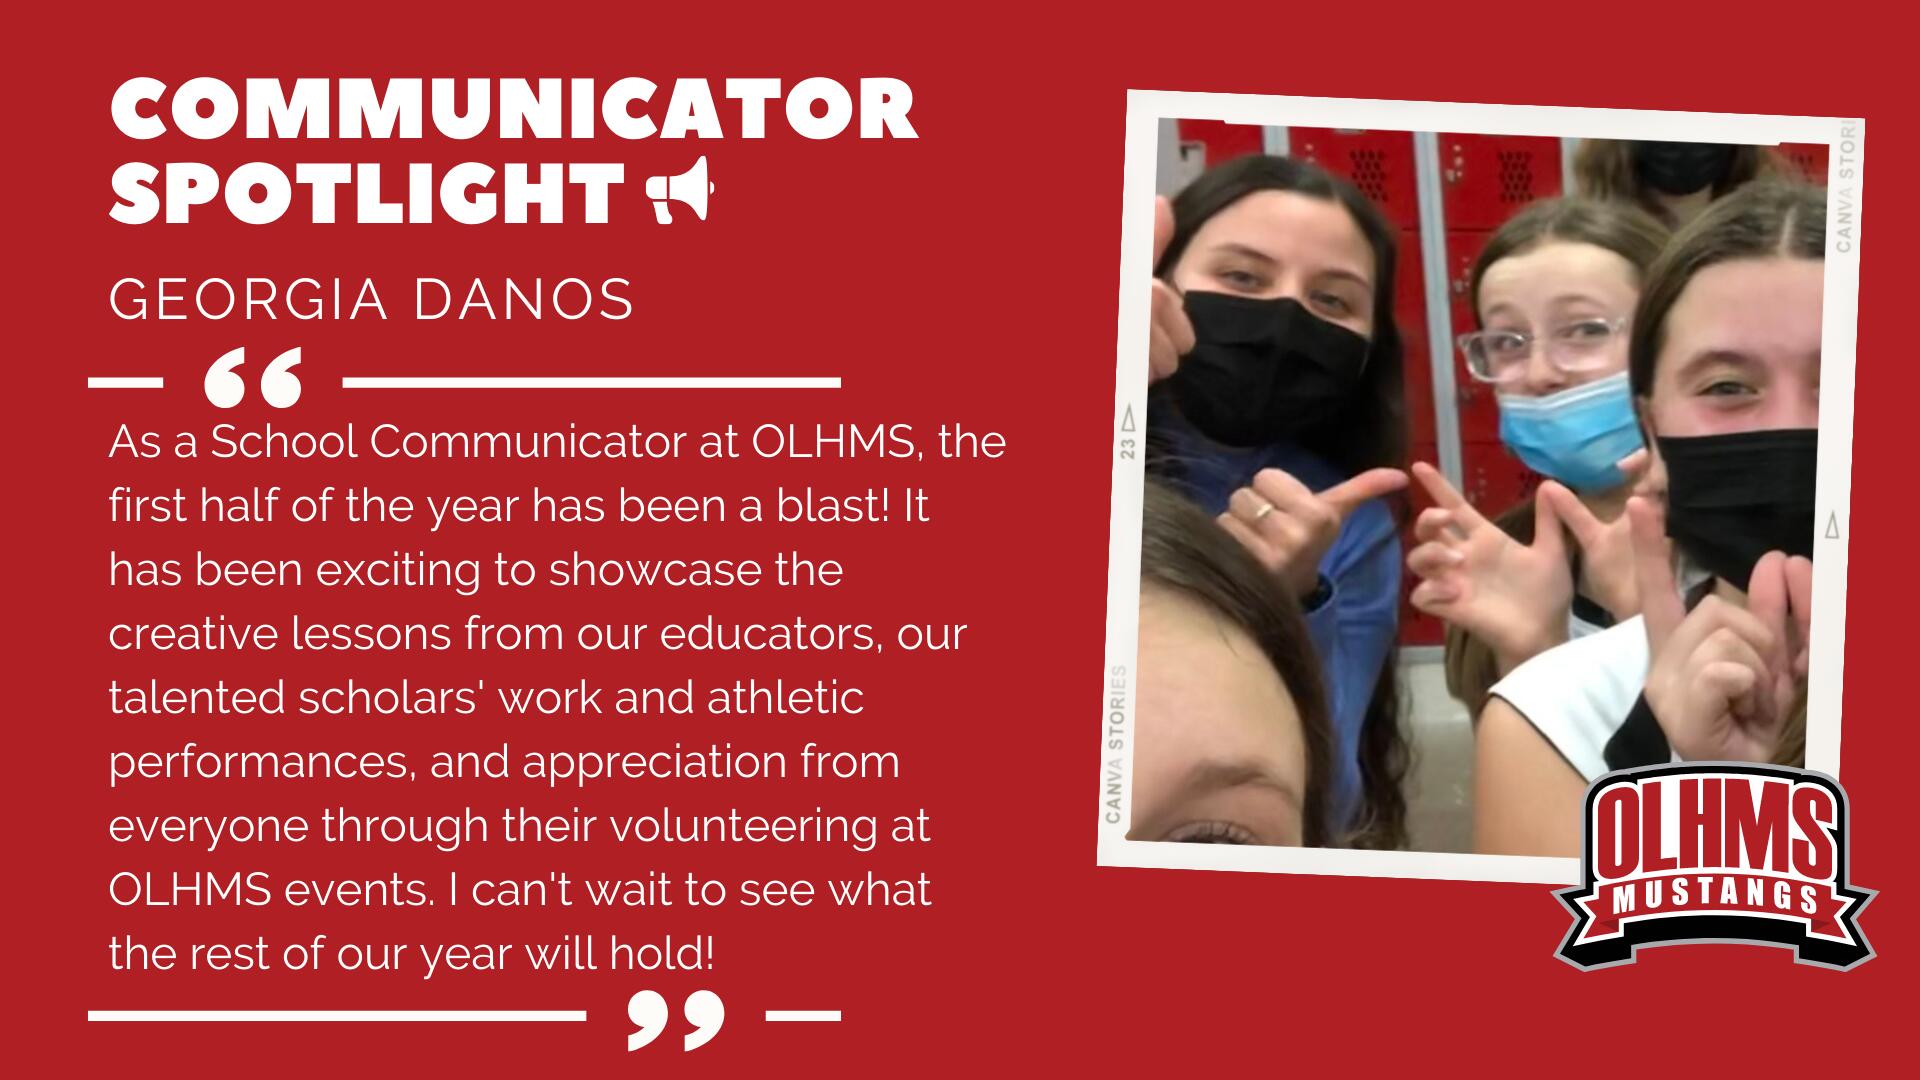 As a School Communicator at OLHMS, the first half of the year has been a blast! It has been exciting to showcase the creative lessons from our educators, our talented scholars' work and athletic performances, and appreciation from everyone through their volunteering at OLHMS events. I can't wait to see what the rest of our year will hold!